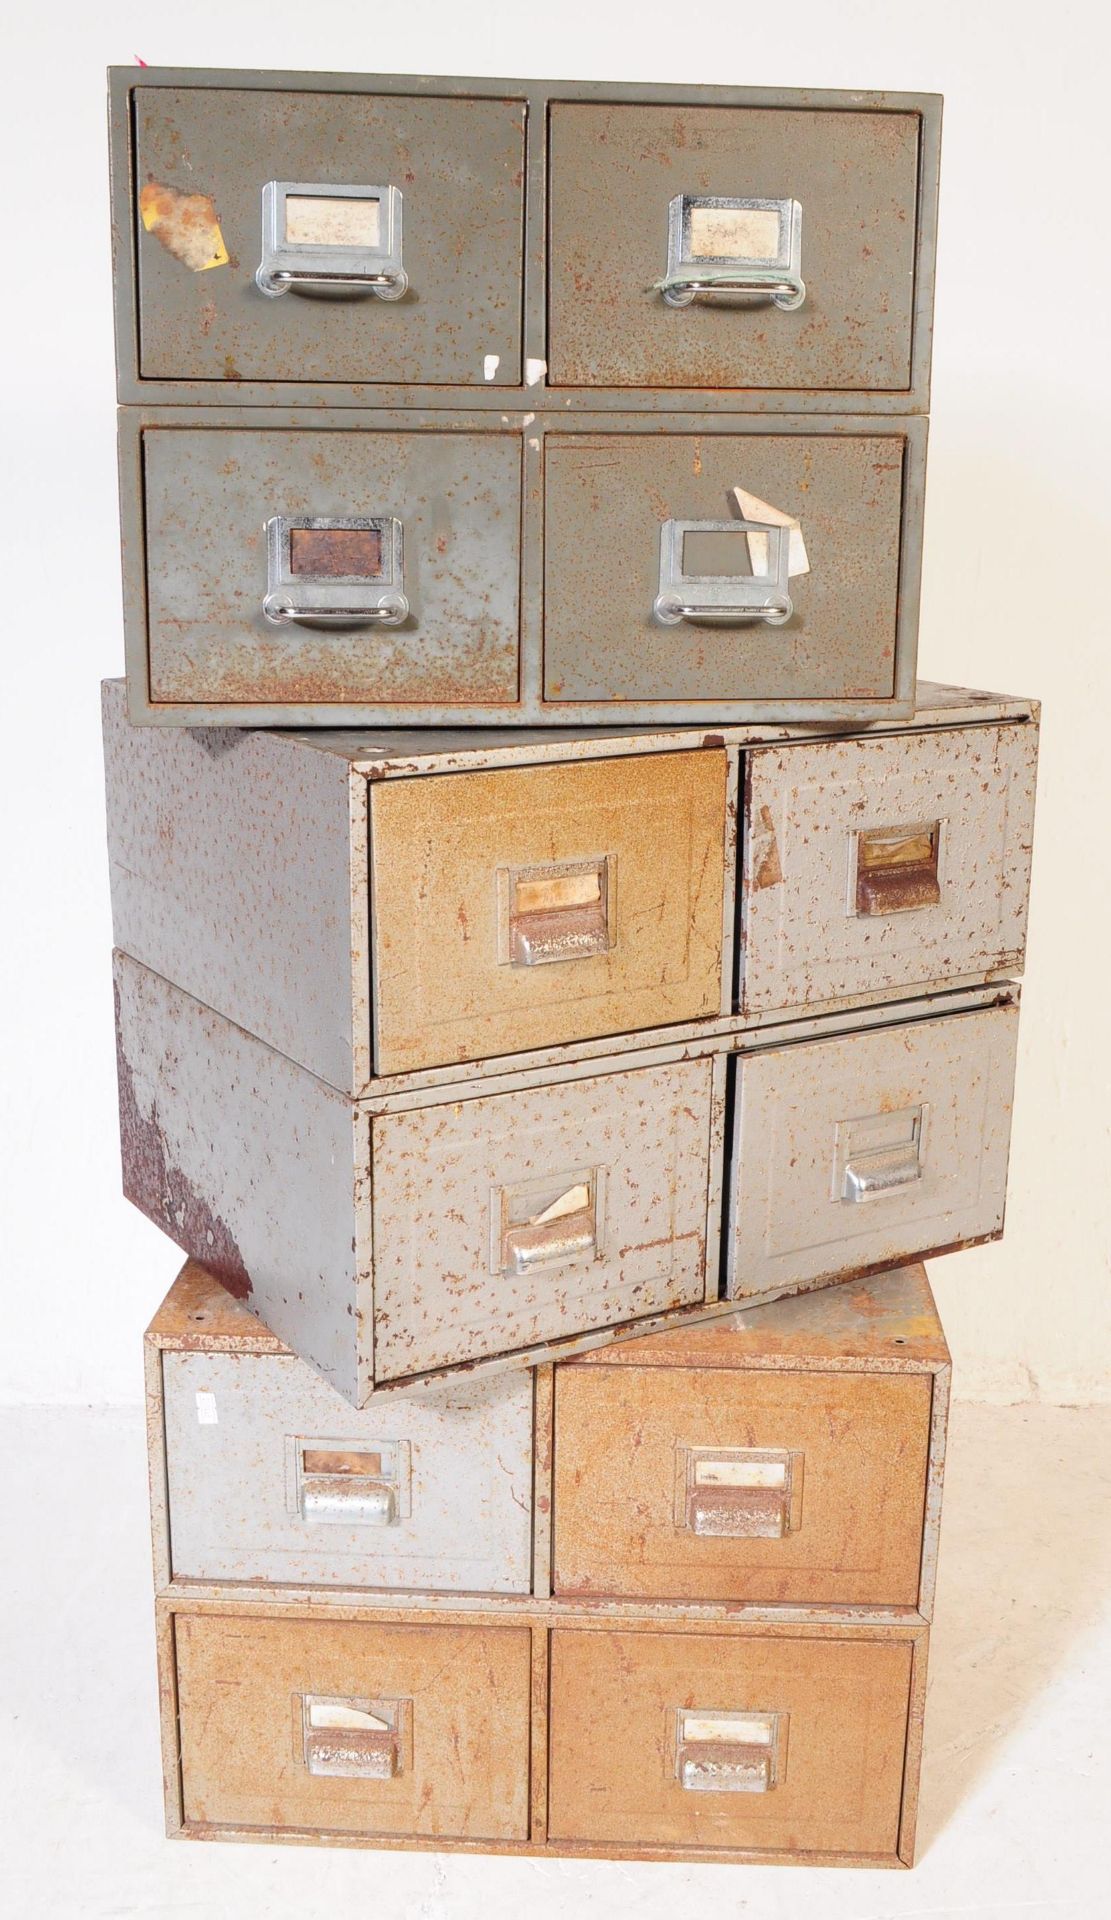 COLLECTION OF INDUSTRIAL 20TH CENTURY METAL FILING CABINETS